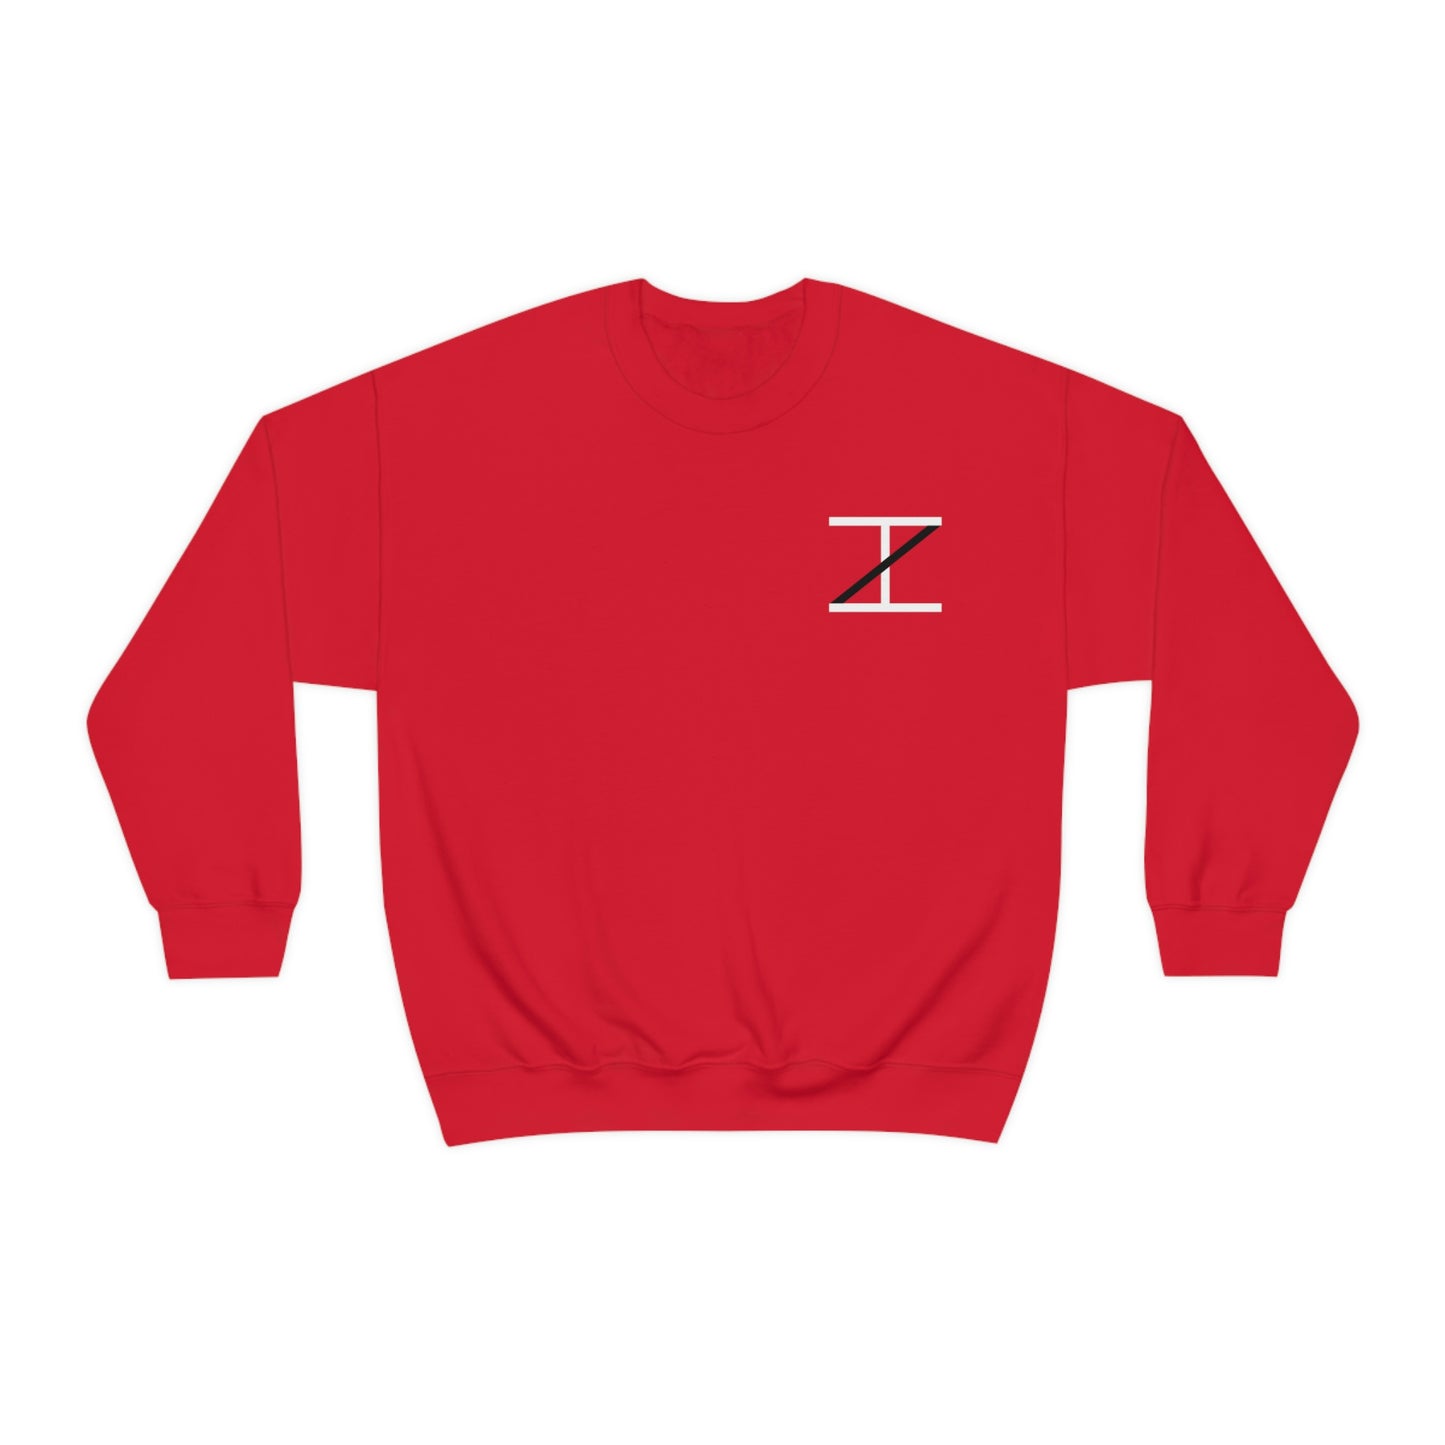 Izzy Miles: Never Trip About What’s Behind You Crewneck